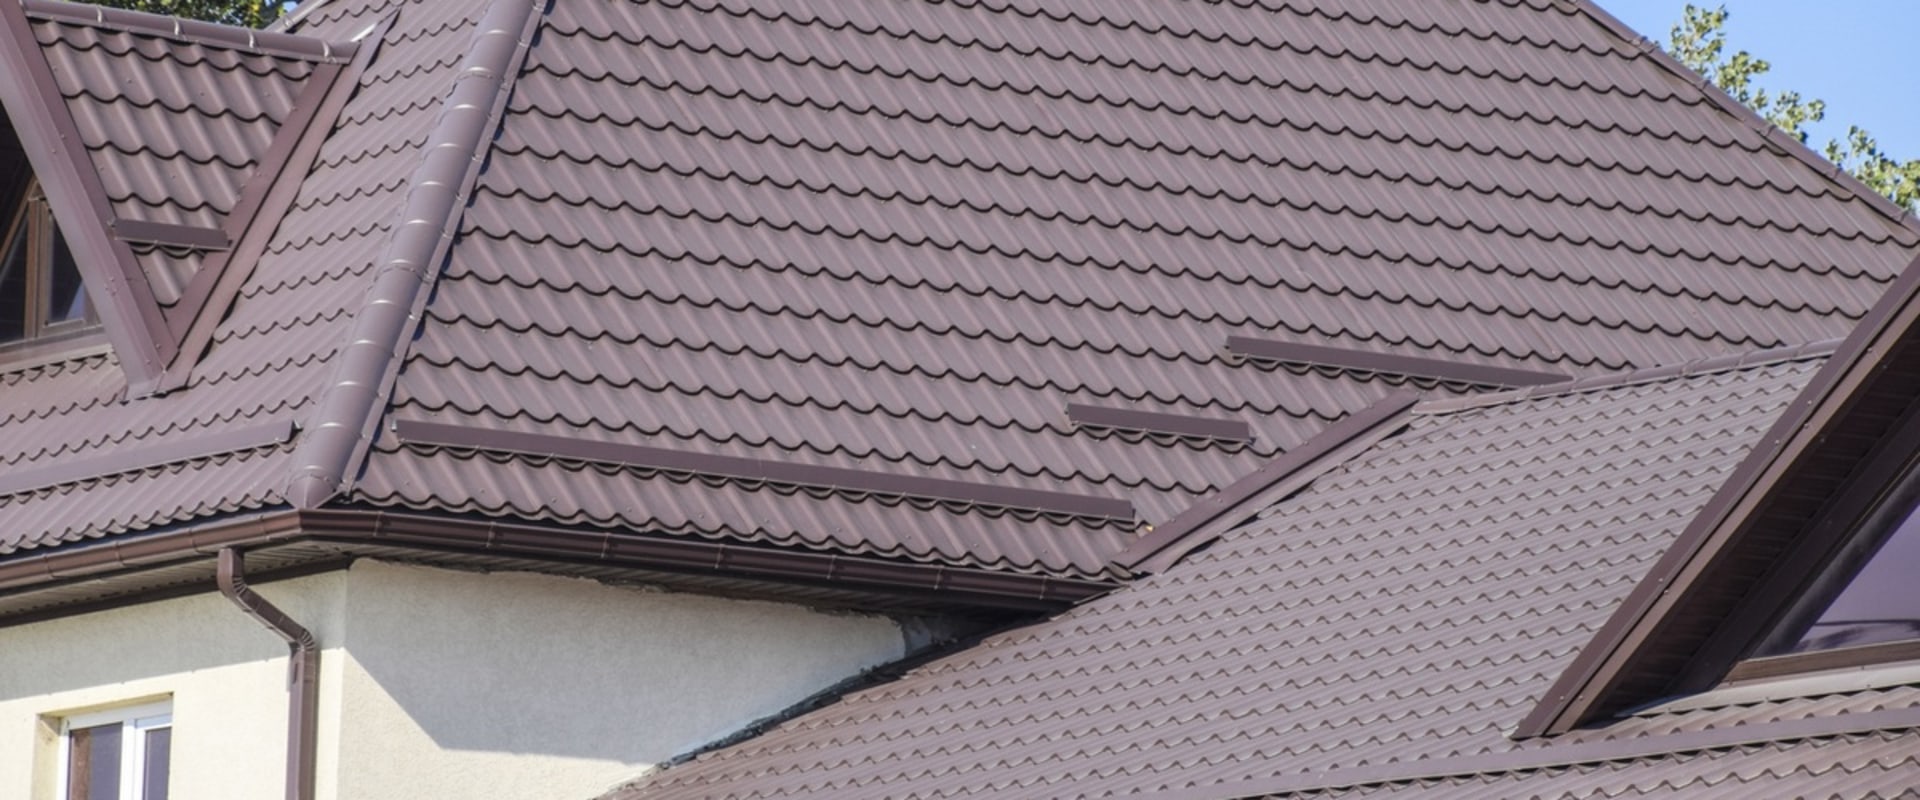 How Much Does It Cost to Replace an Entire Roof?